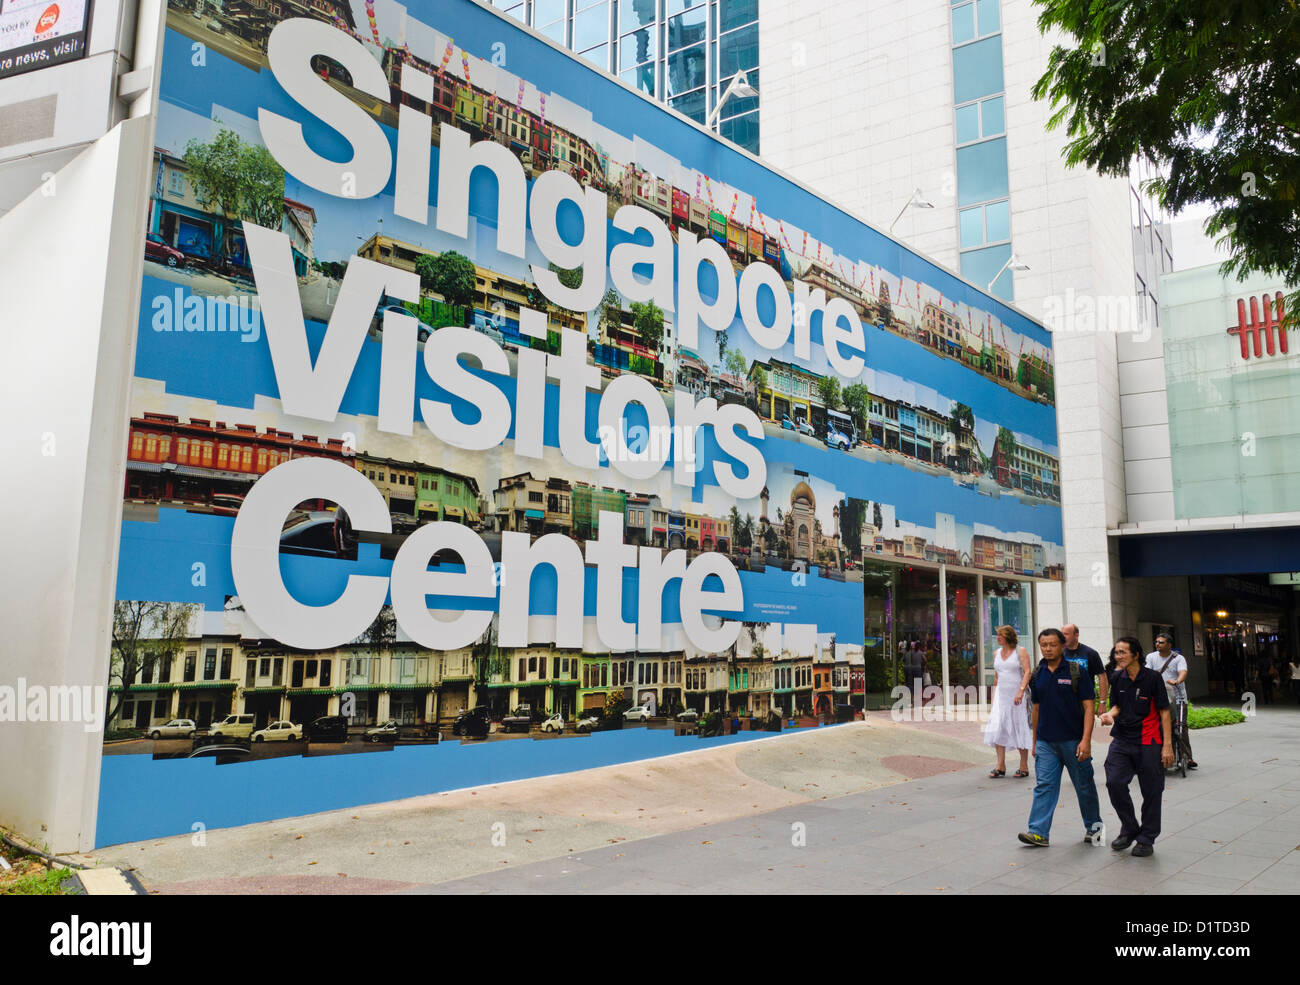 Old Singapore Visitors Centre on Orchard Rd, Singapore Stock Photo